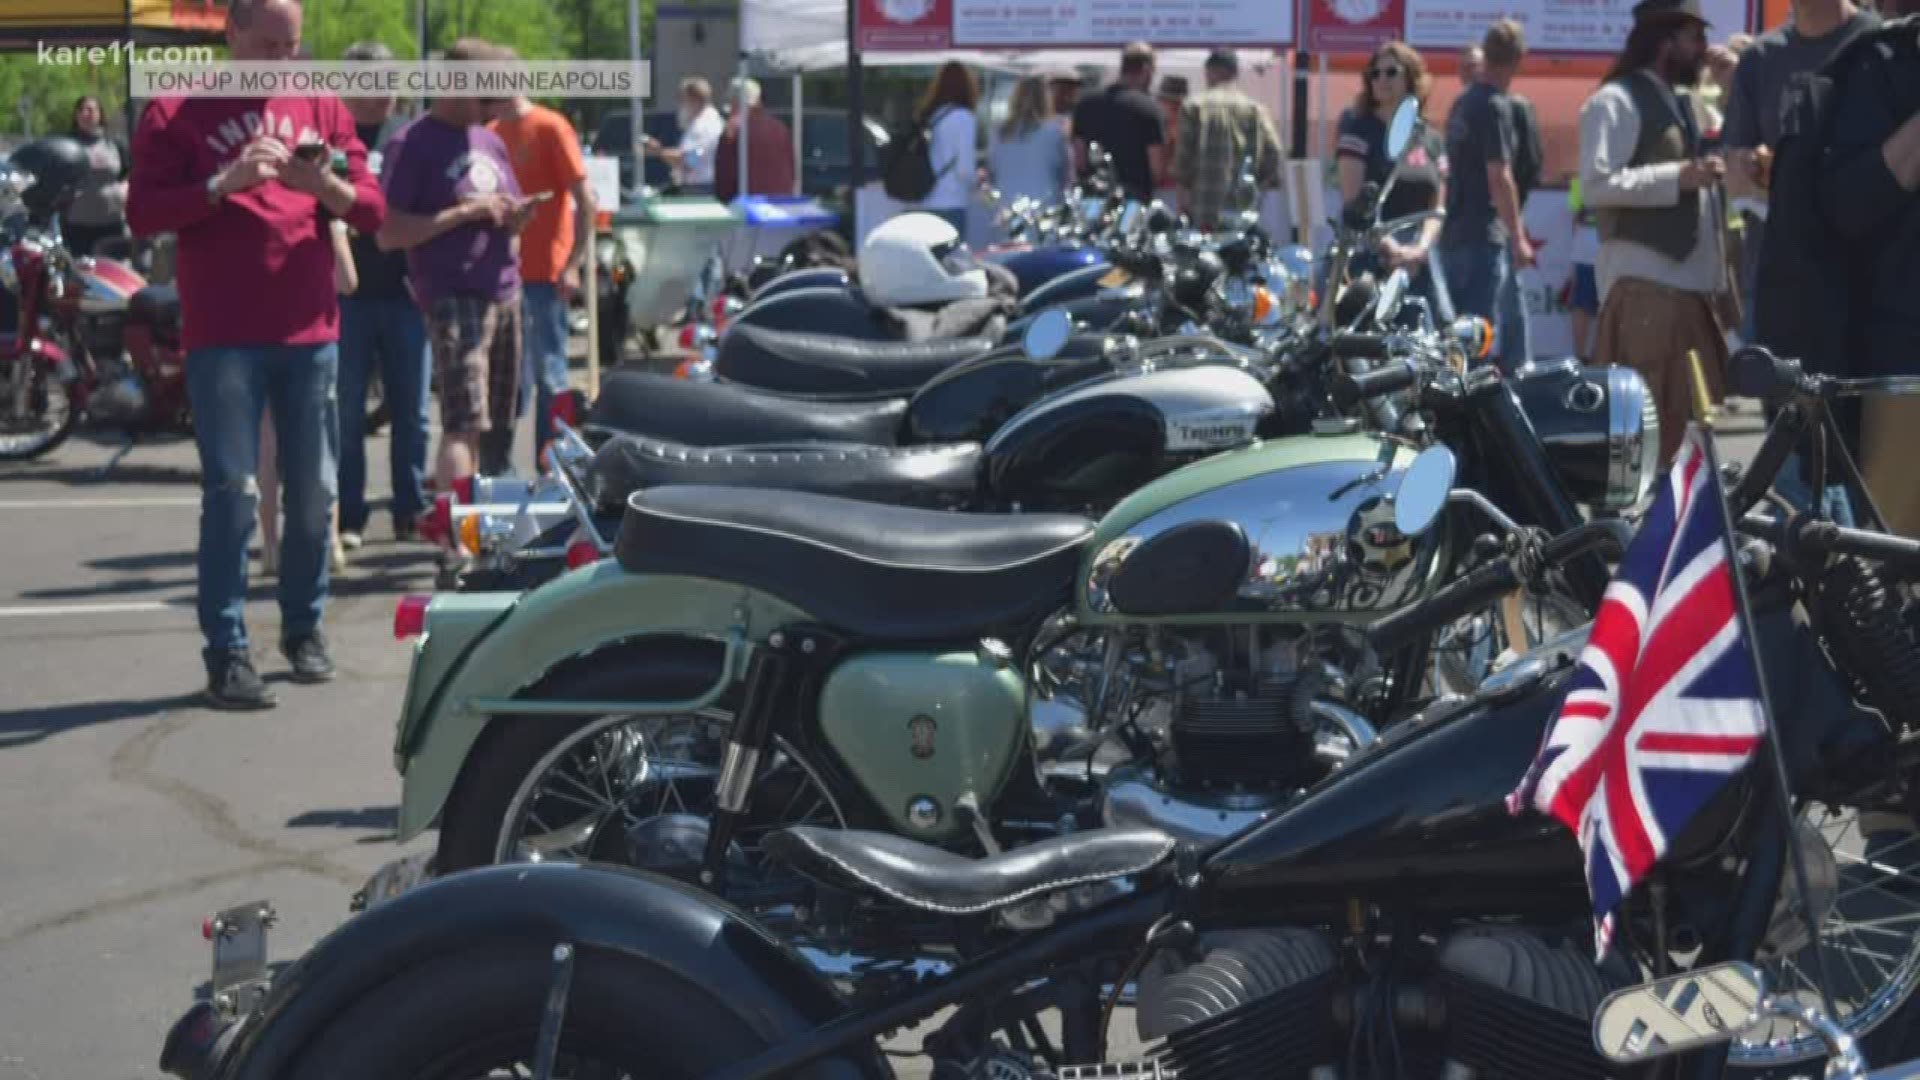 The annual motorcycle show draws thousands of vintage and contemporary motorcycle enthusiasts and hundreds of motorcycles.